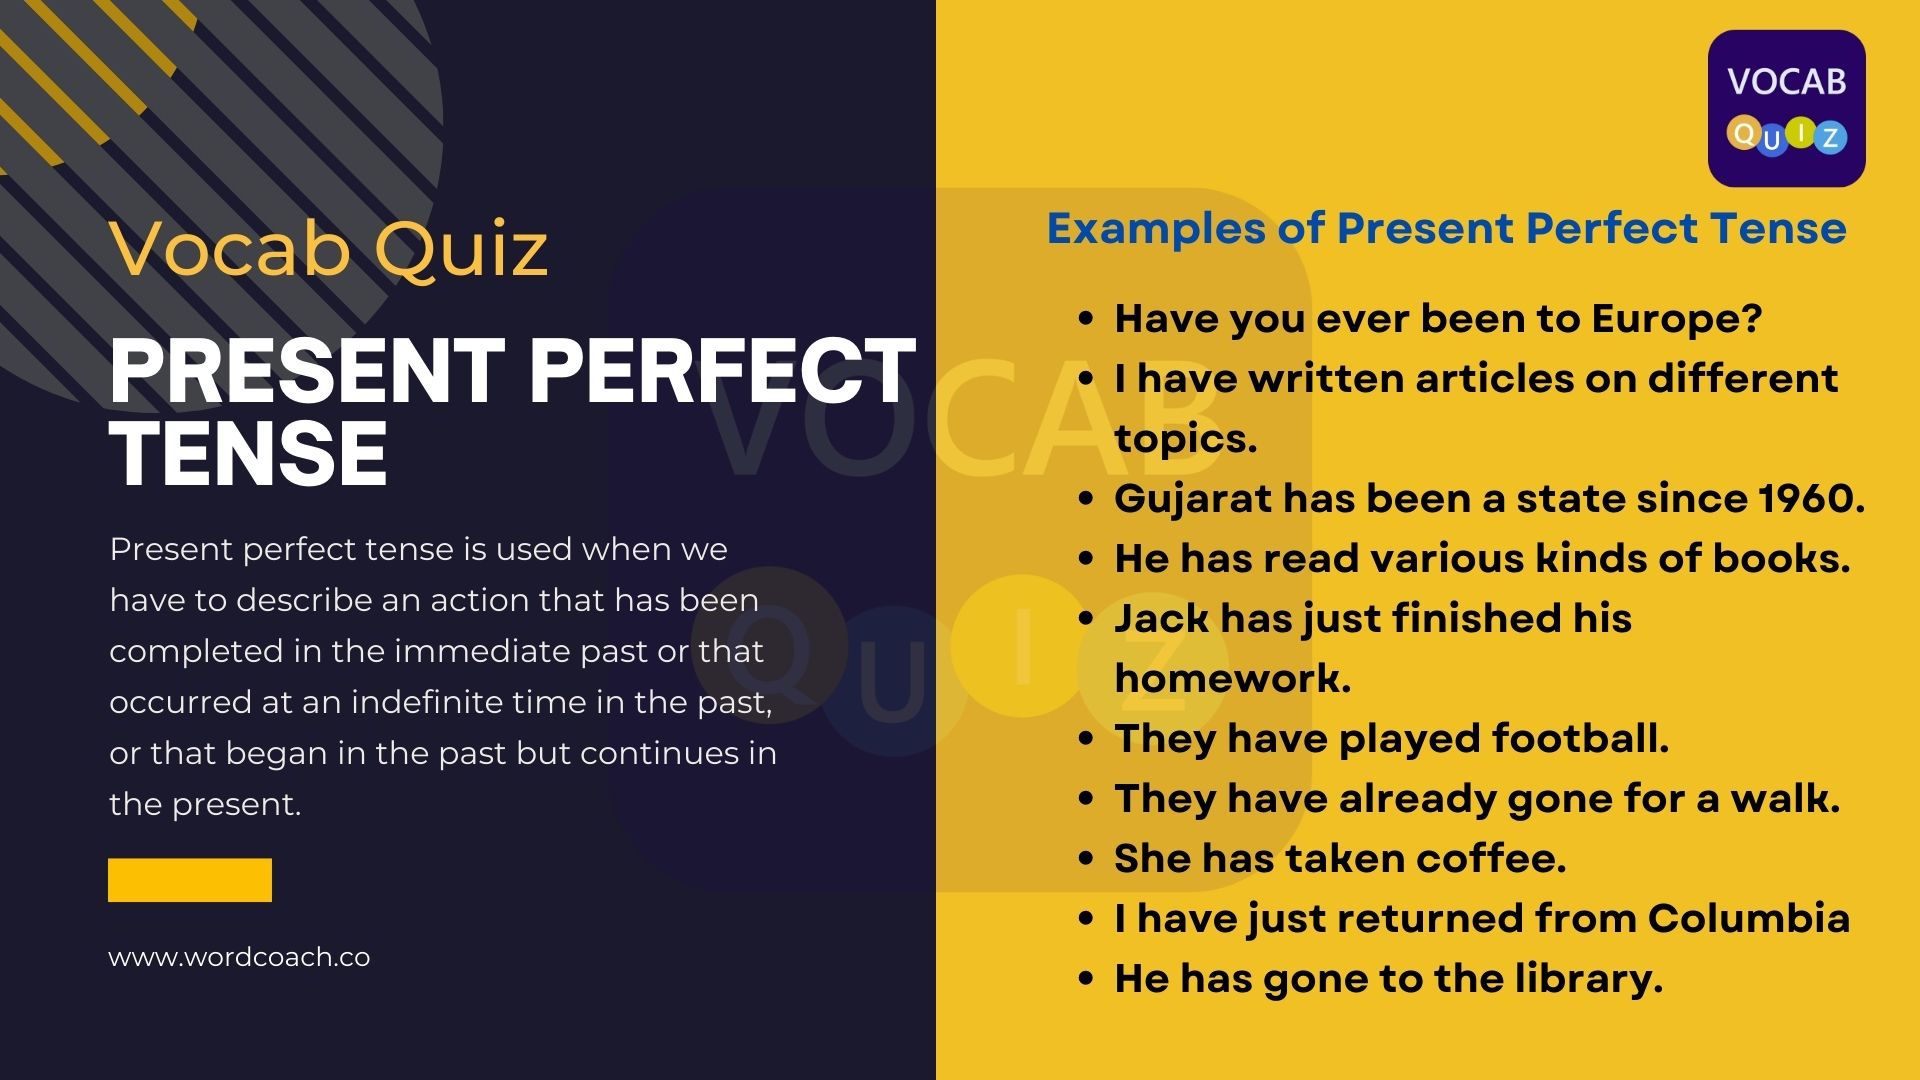 Present Perfect Tense | Definition & Examples - wordcoach.co